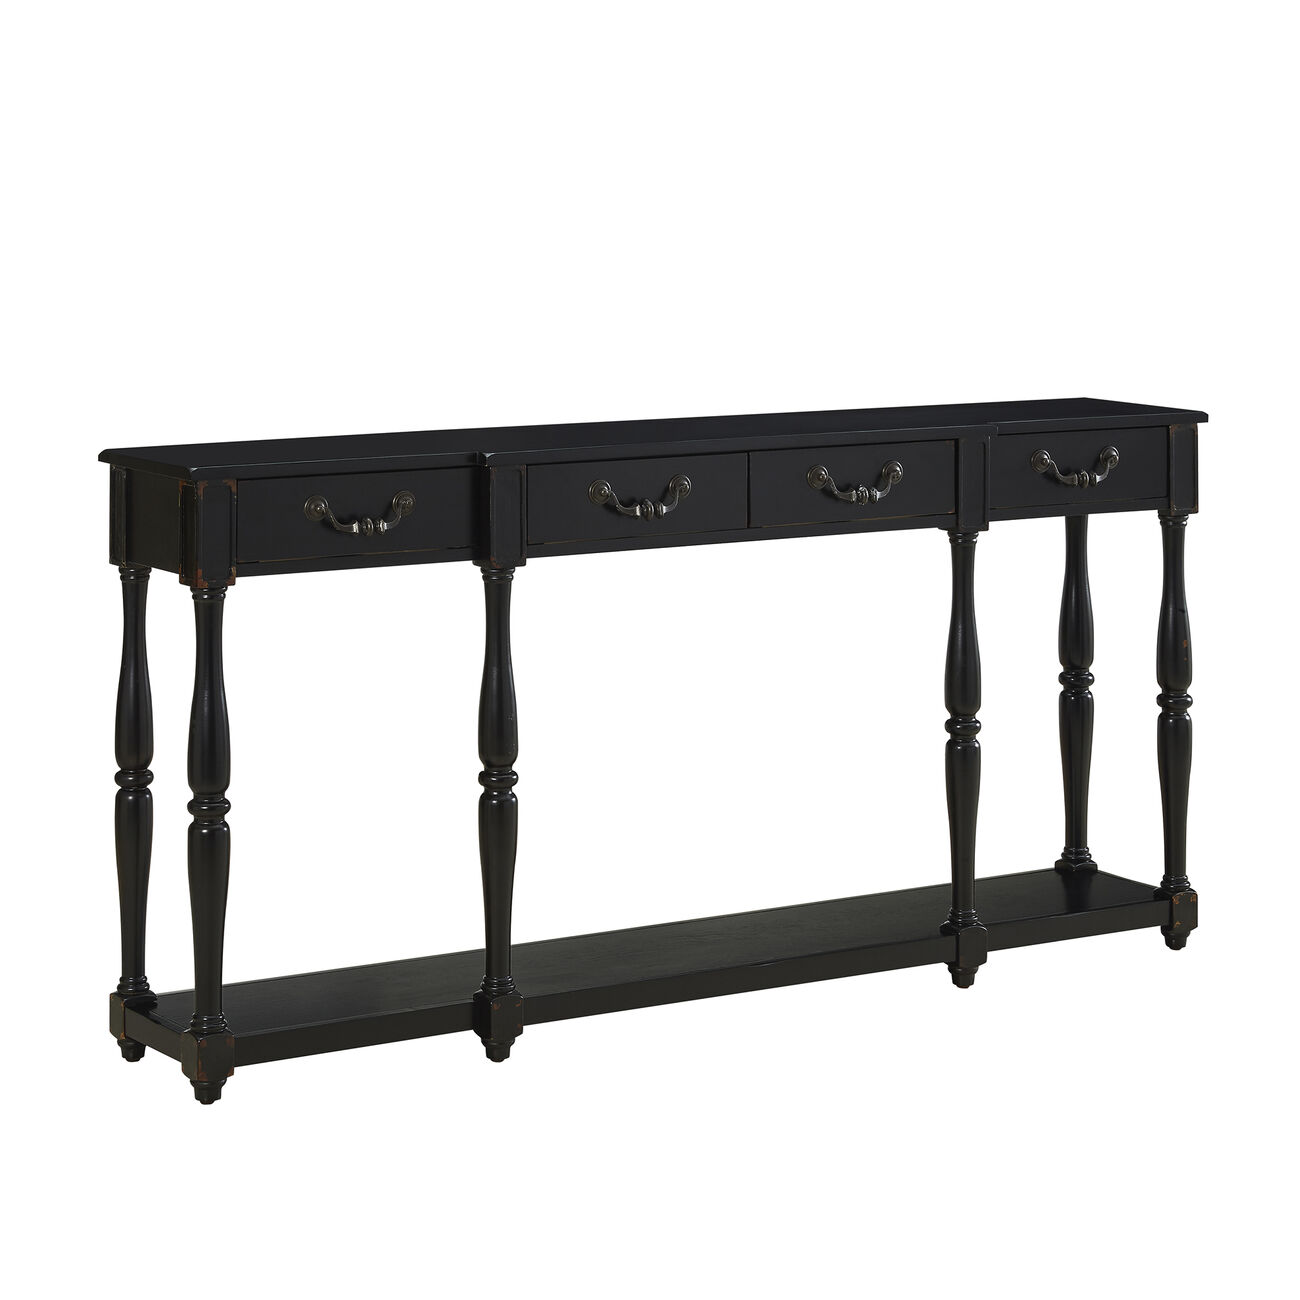 4 Drawer Wooden Console Table with Open Bottom Shelf and Spindle Legs,Black